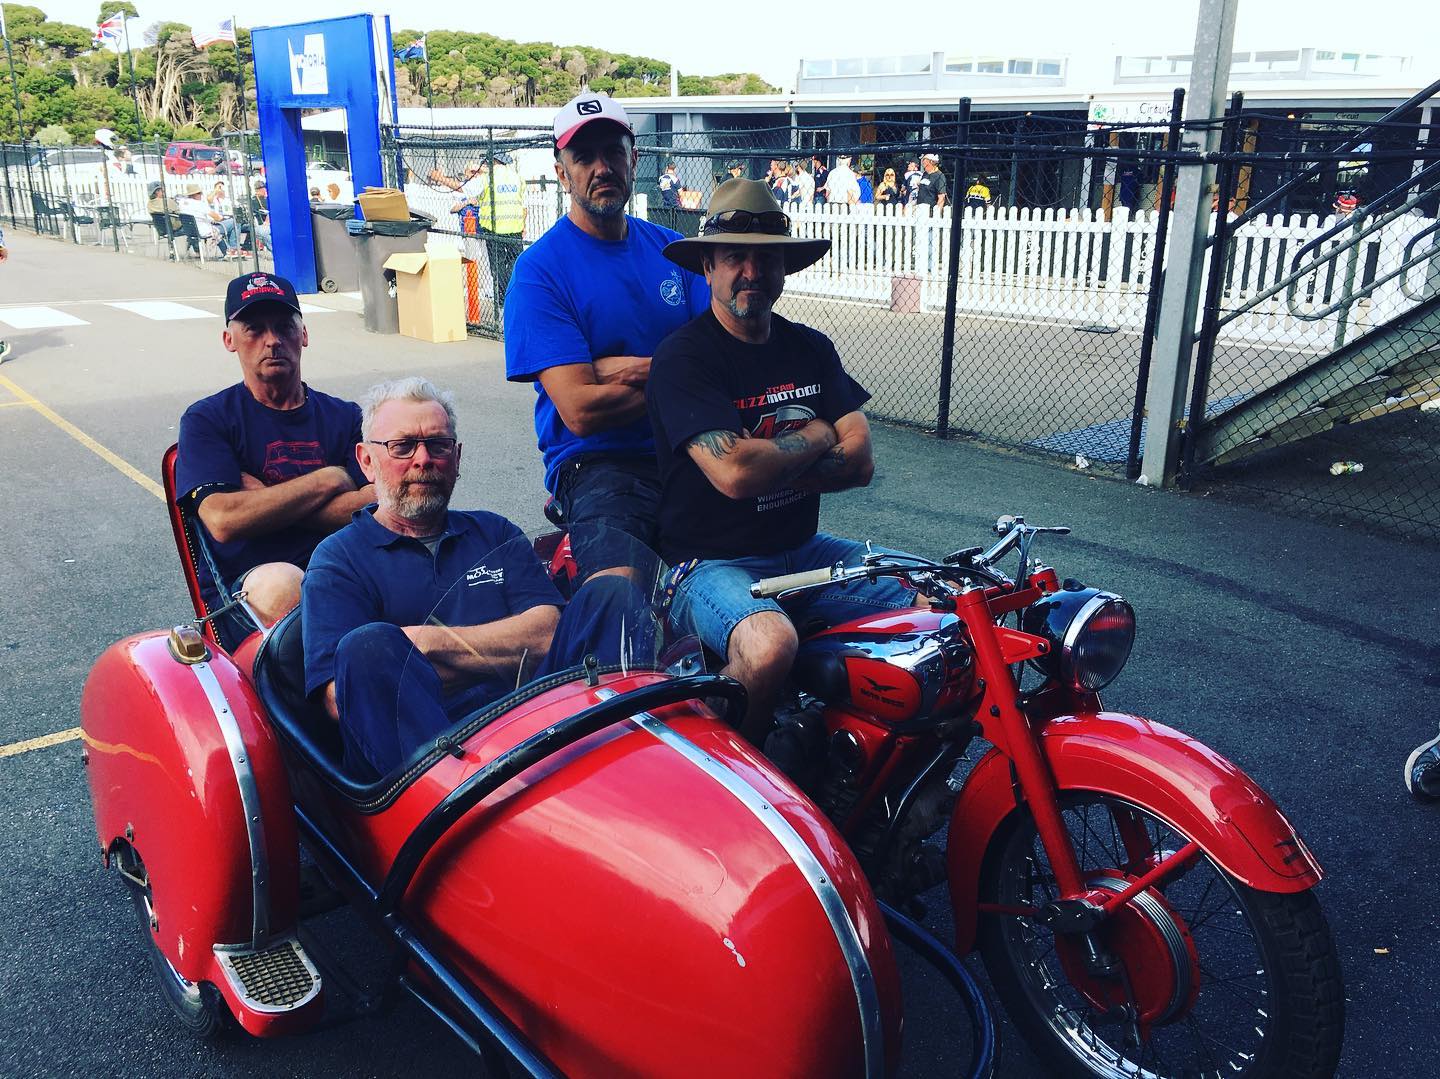 The hard men of Guzzi racing in Australia arrive in style at Phillip Island Race Track